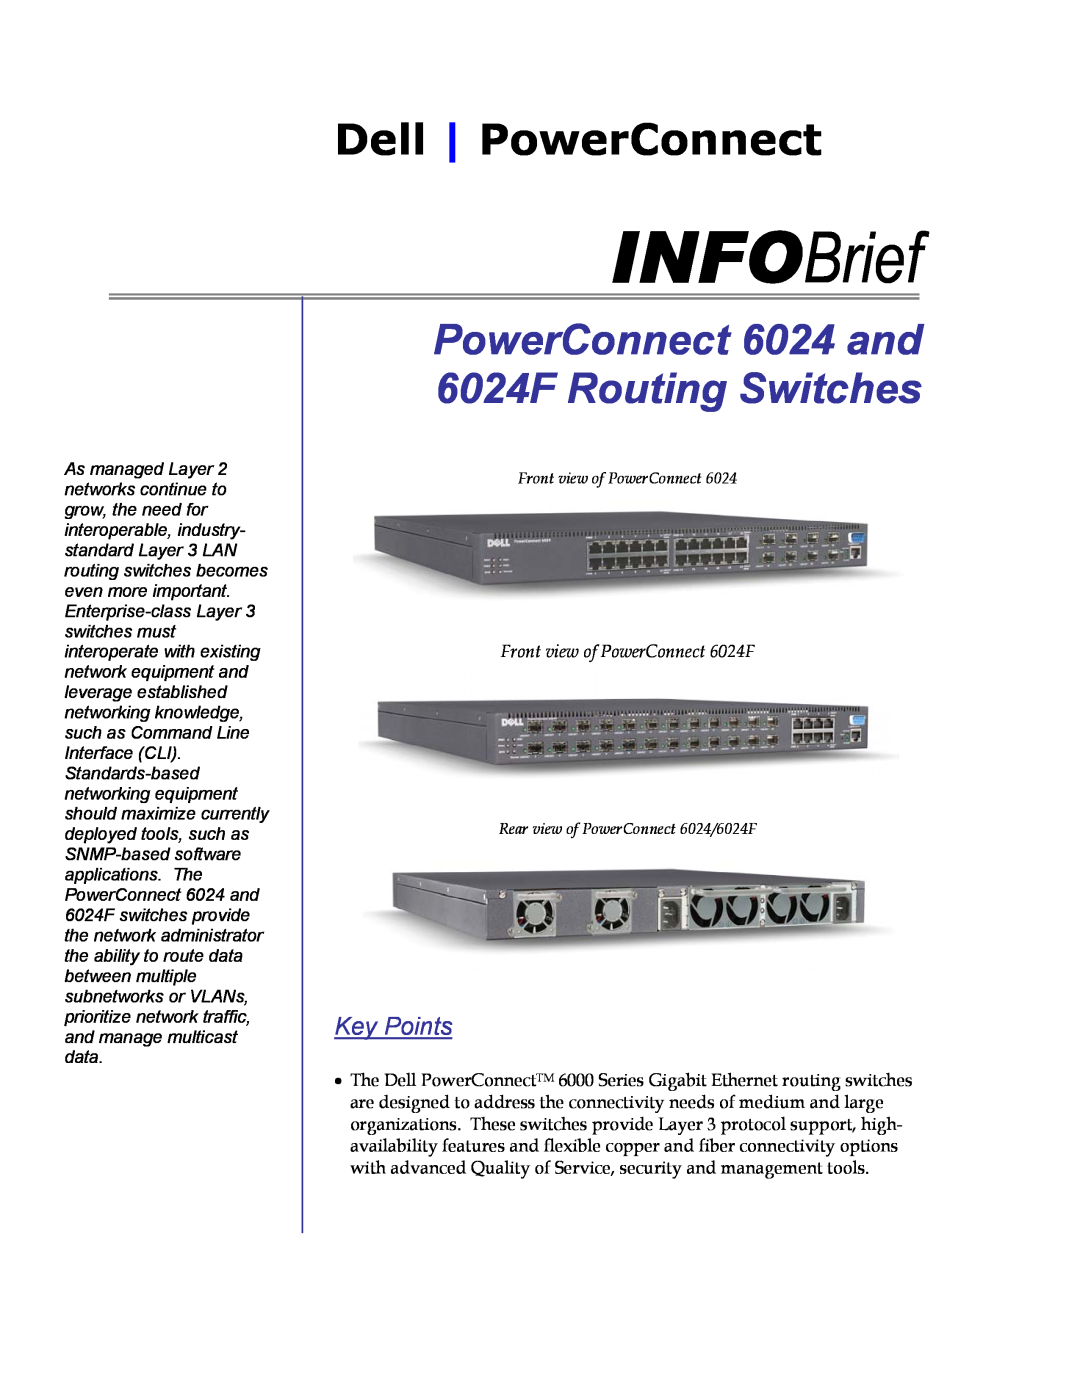 Dell manual Key Points, INFOBrief, Dell PowerConnect, PowerConnect 6024 and 6024F Routing Switches 